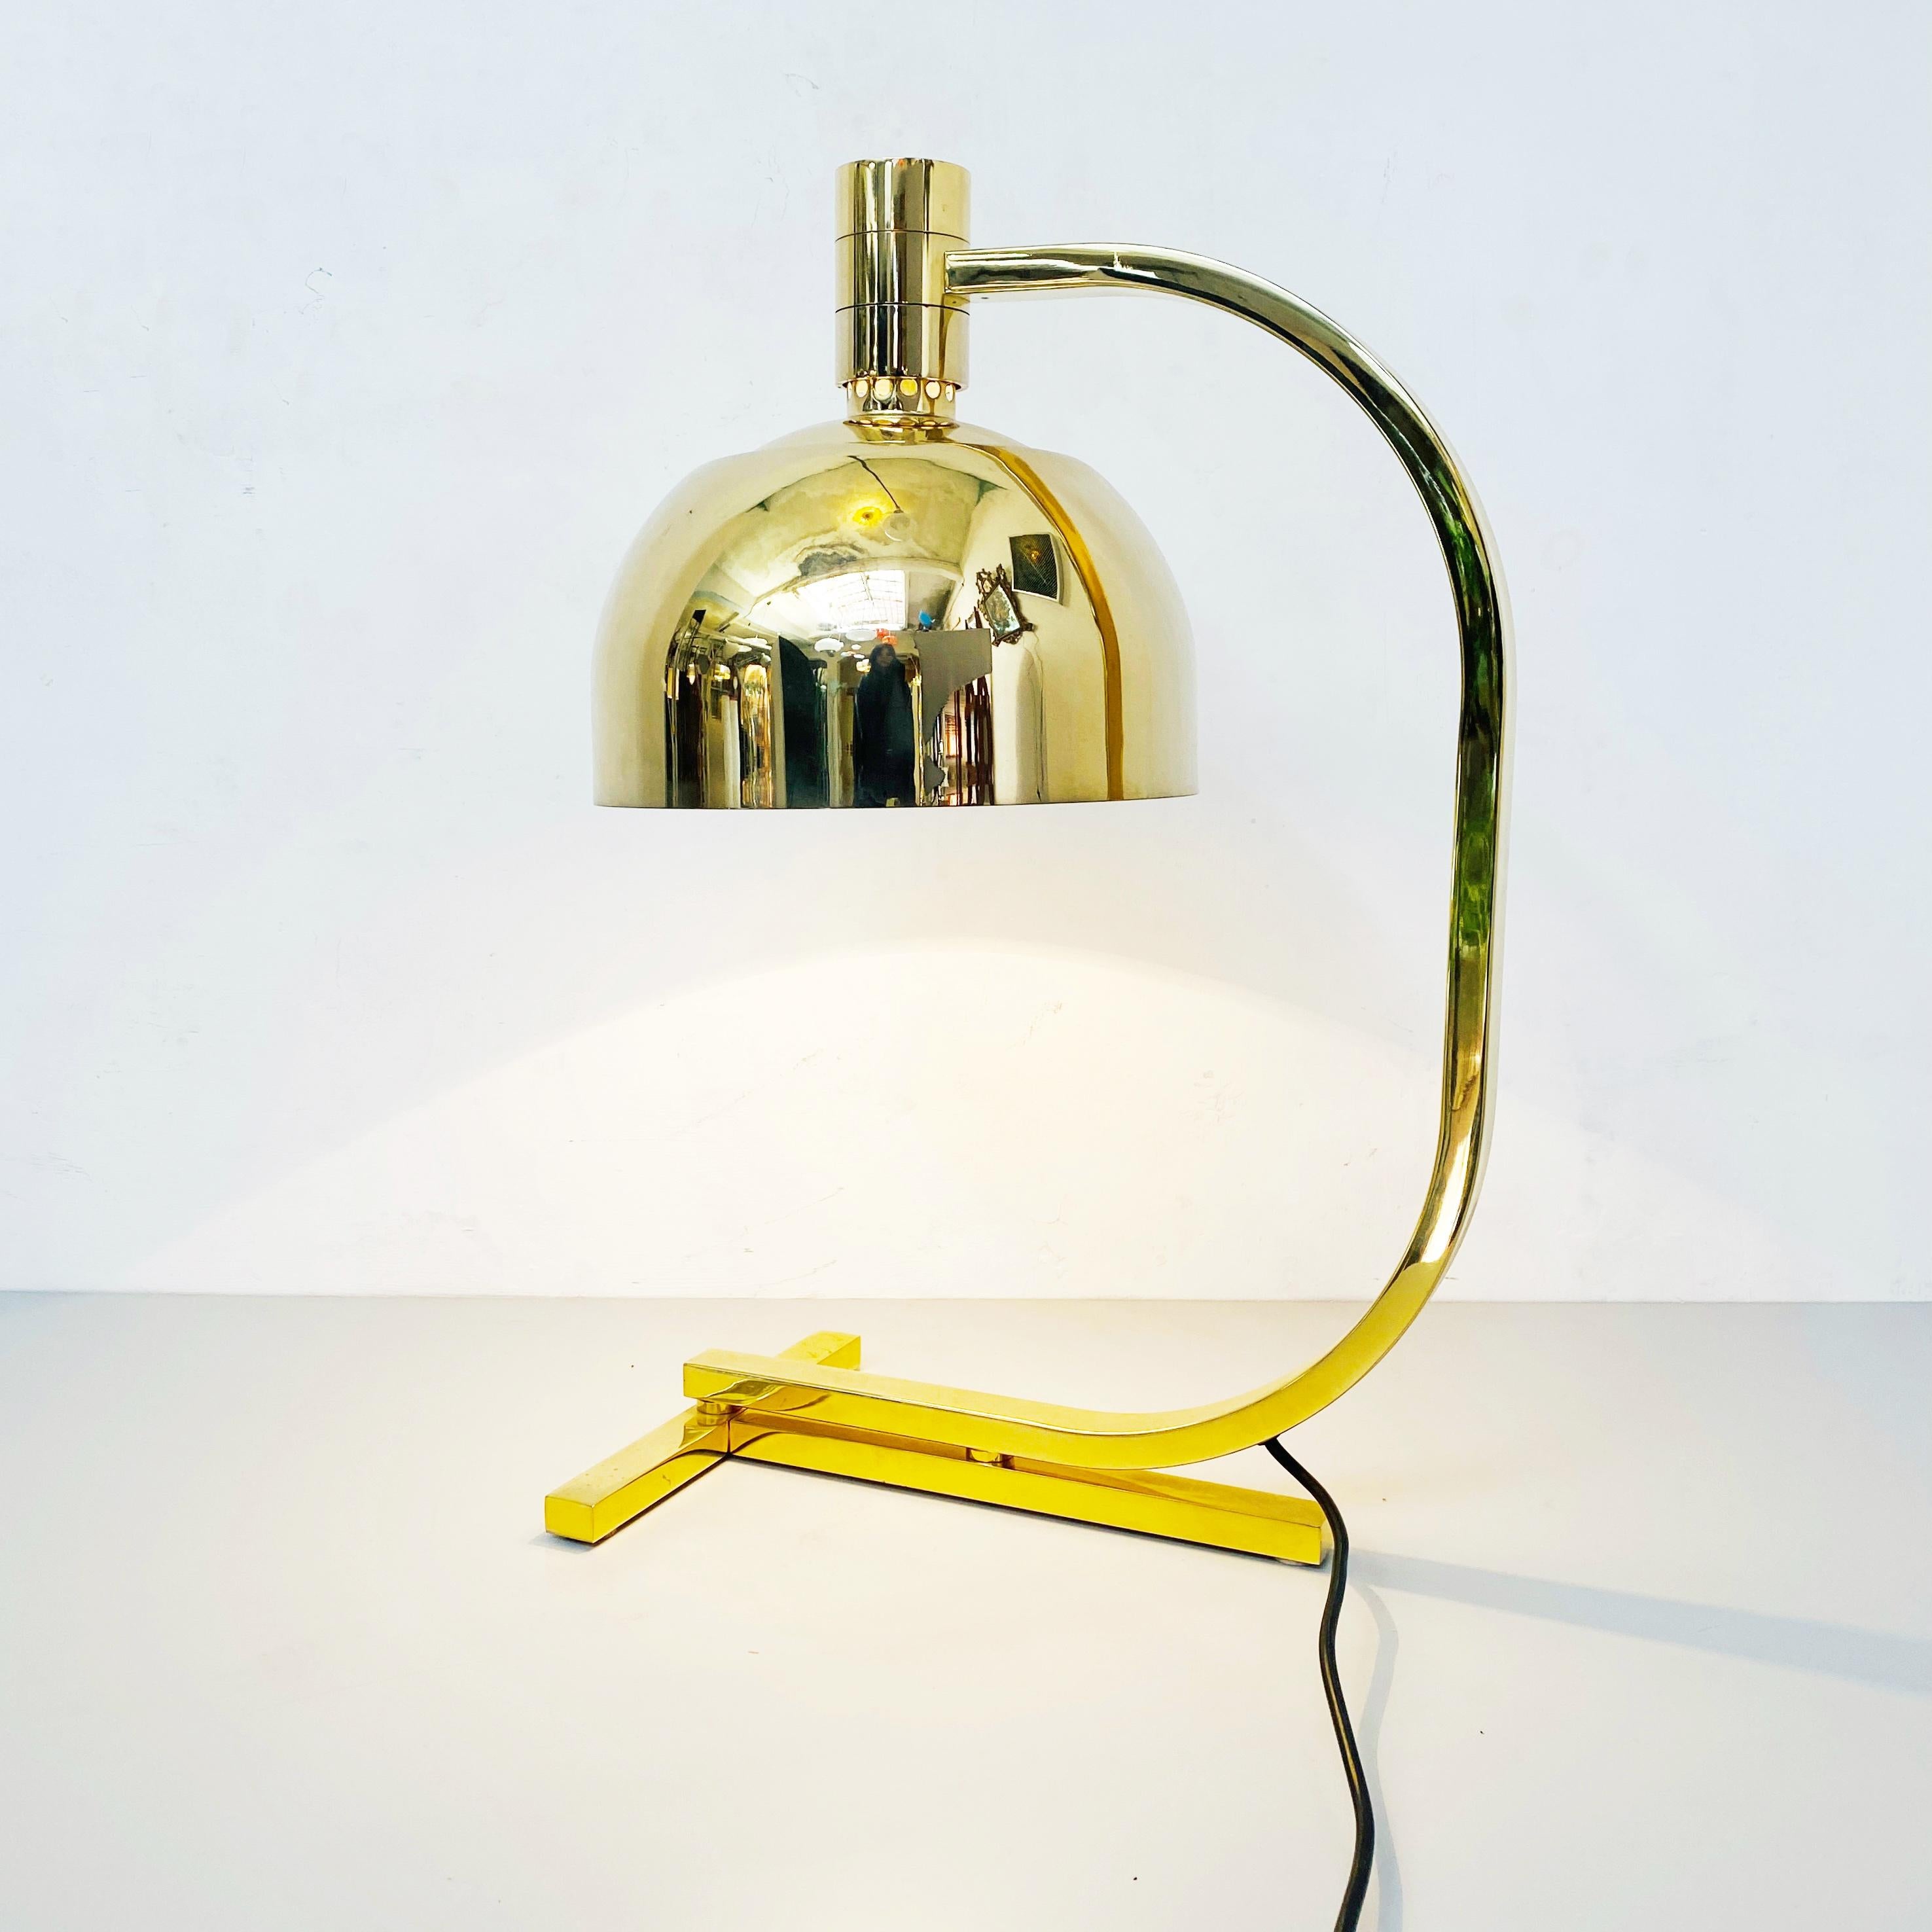 AM \ AS Gold Chrome Table Lamp by Franco Albini and Franca Helg for Sirrah, 1969 For Sale 2